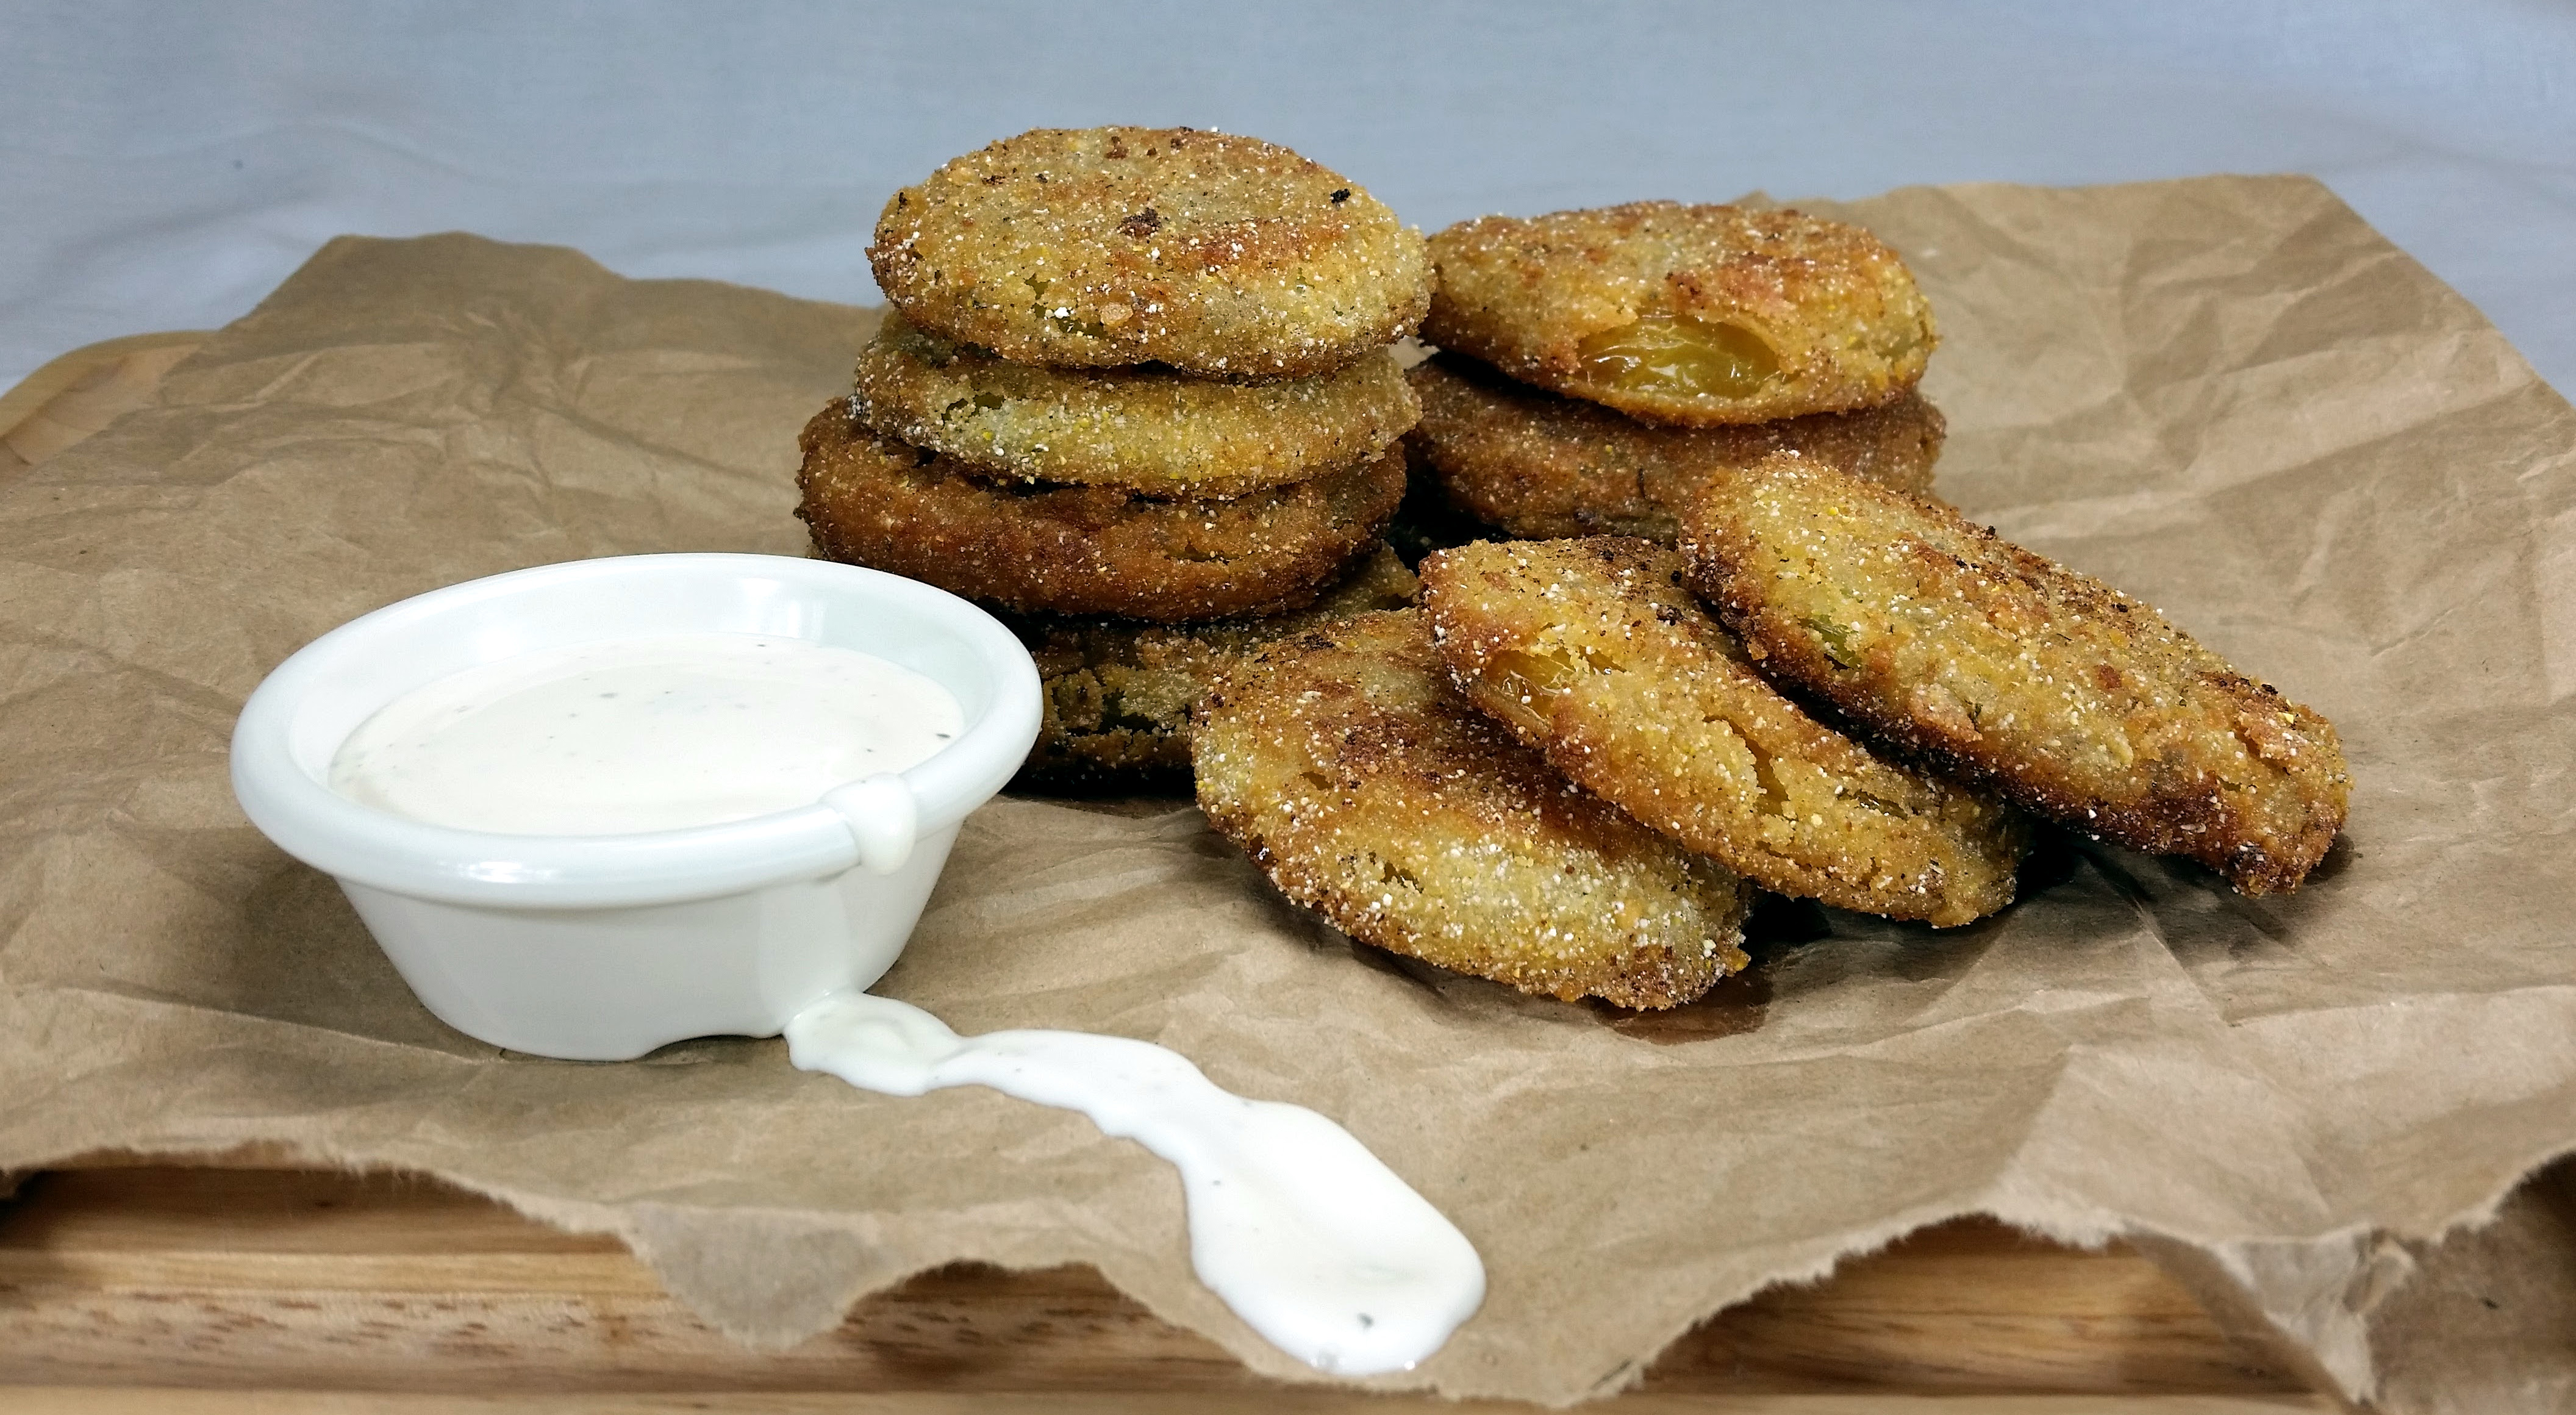 Fried Green Tomatoes - The Grazing Glutton